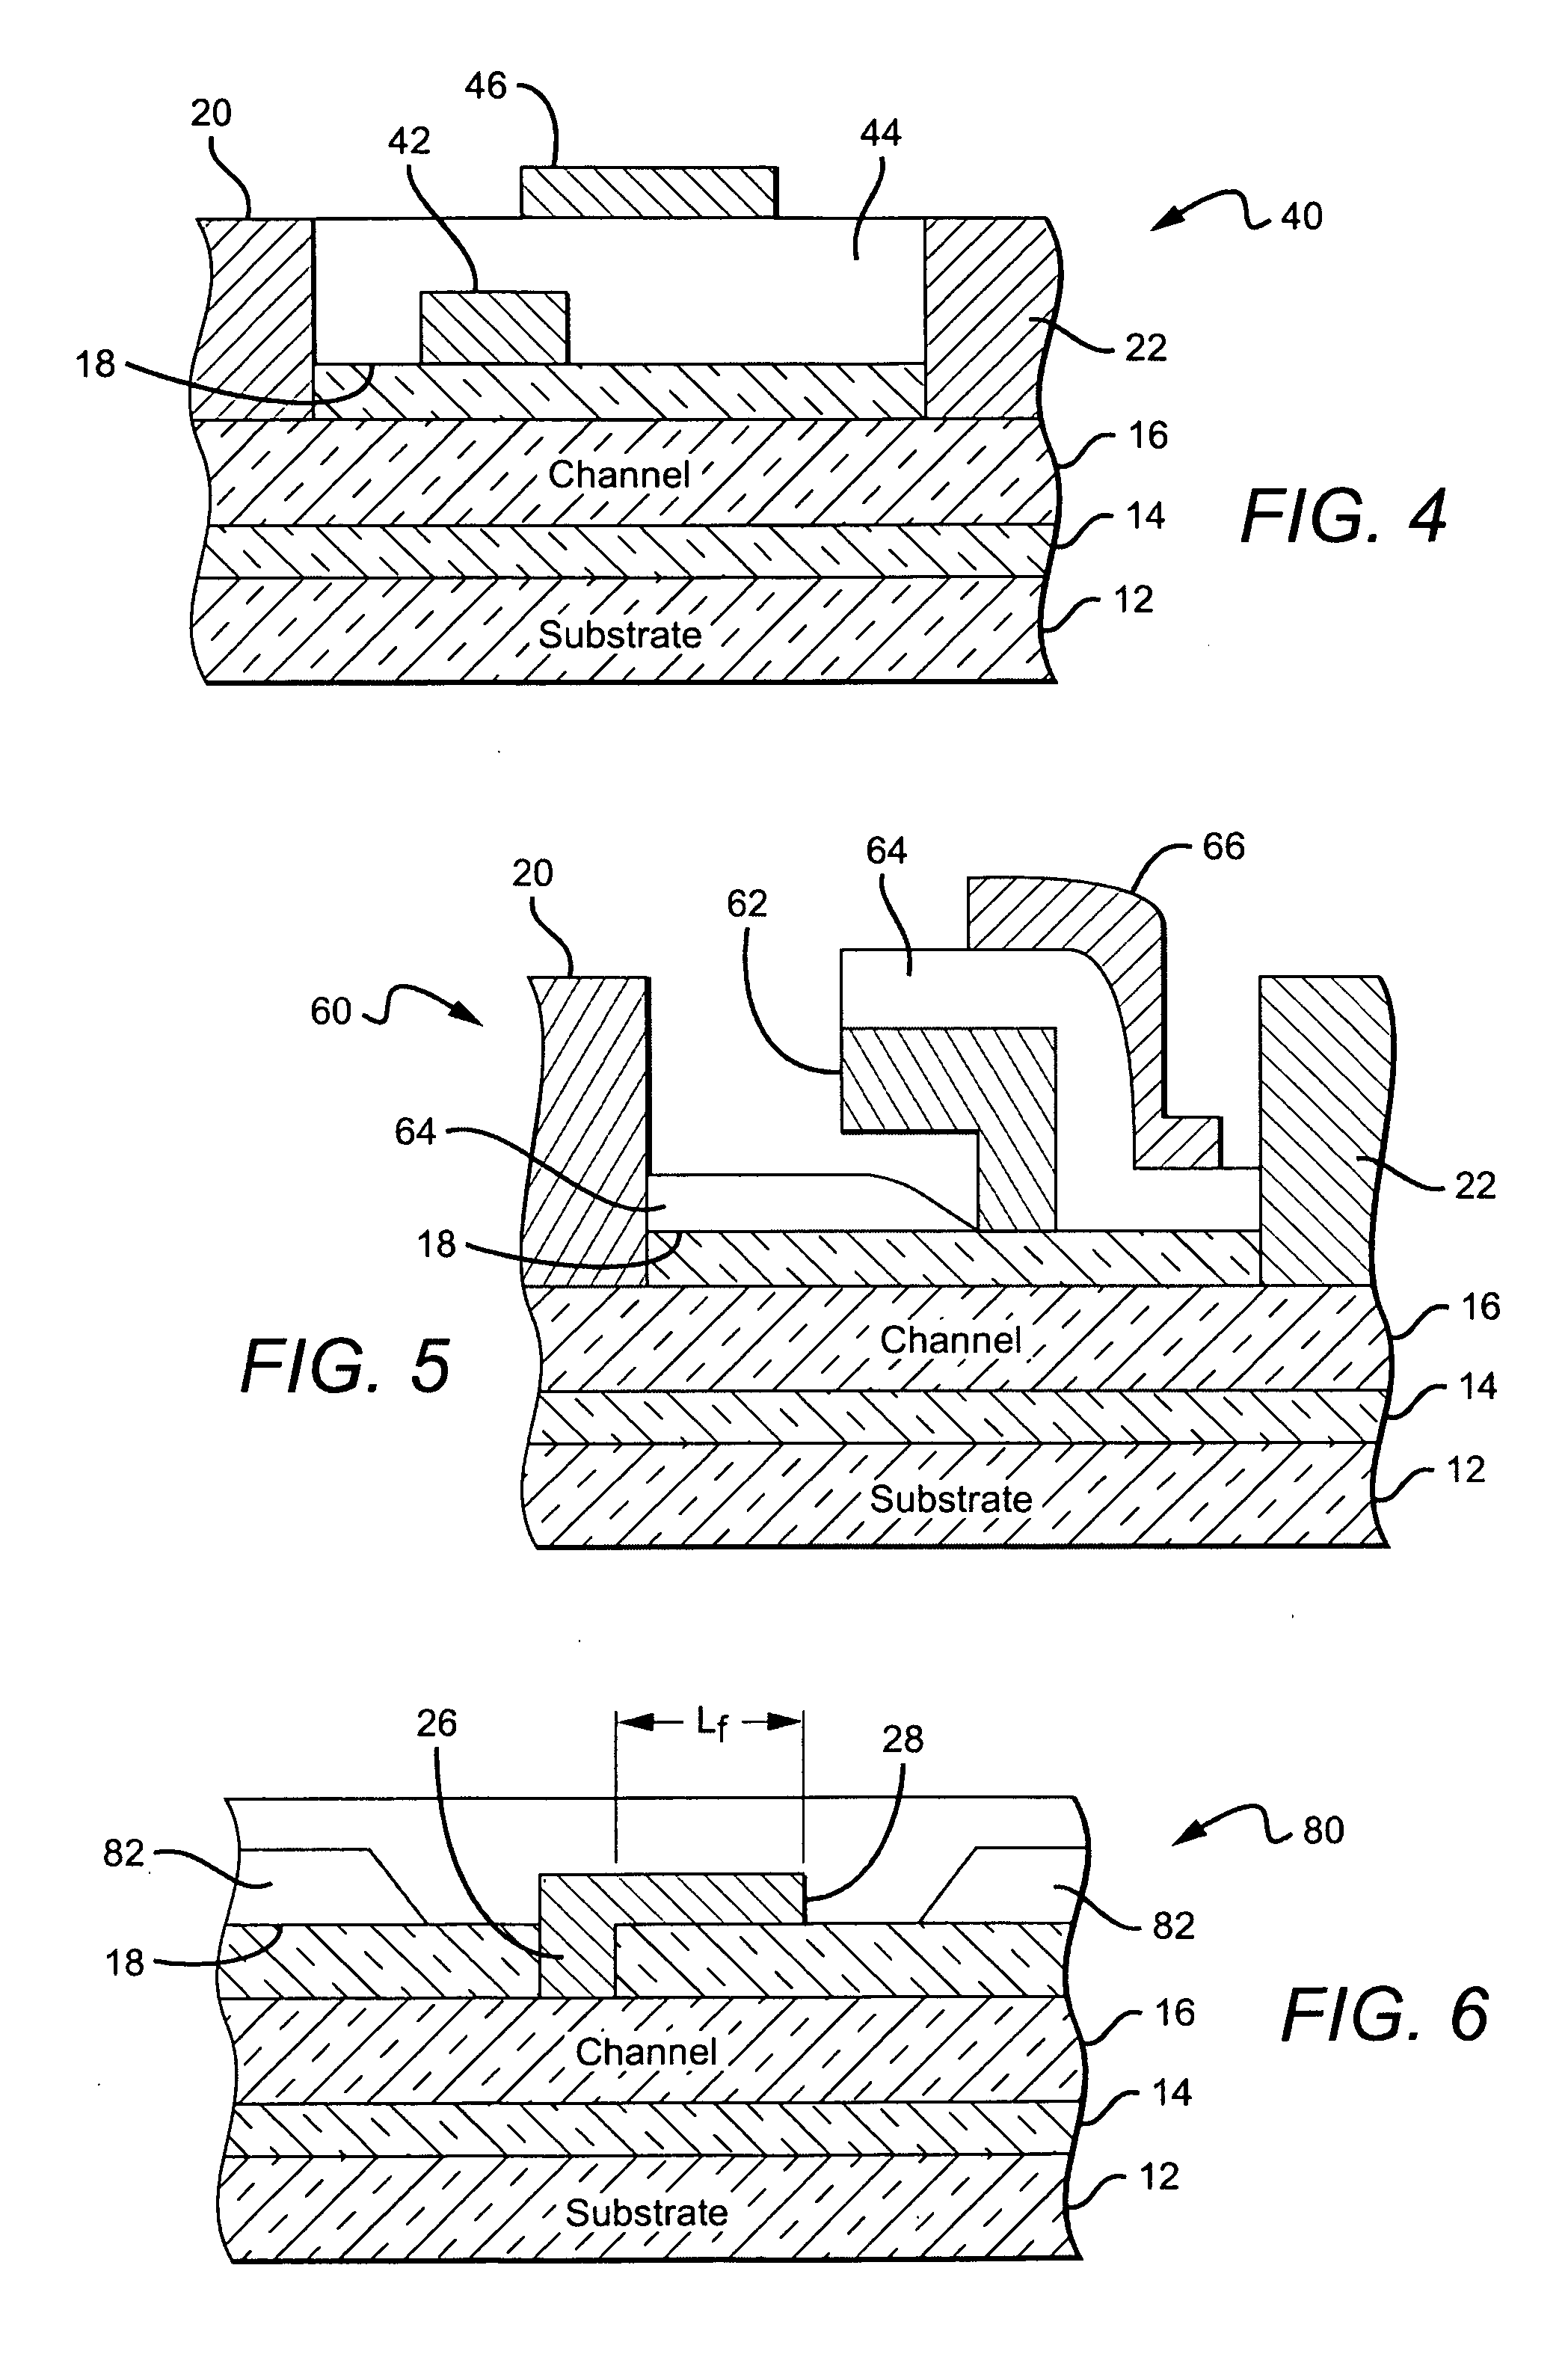 Cascode amplifier structures including wide bandgap field effect transistor with field plates